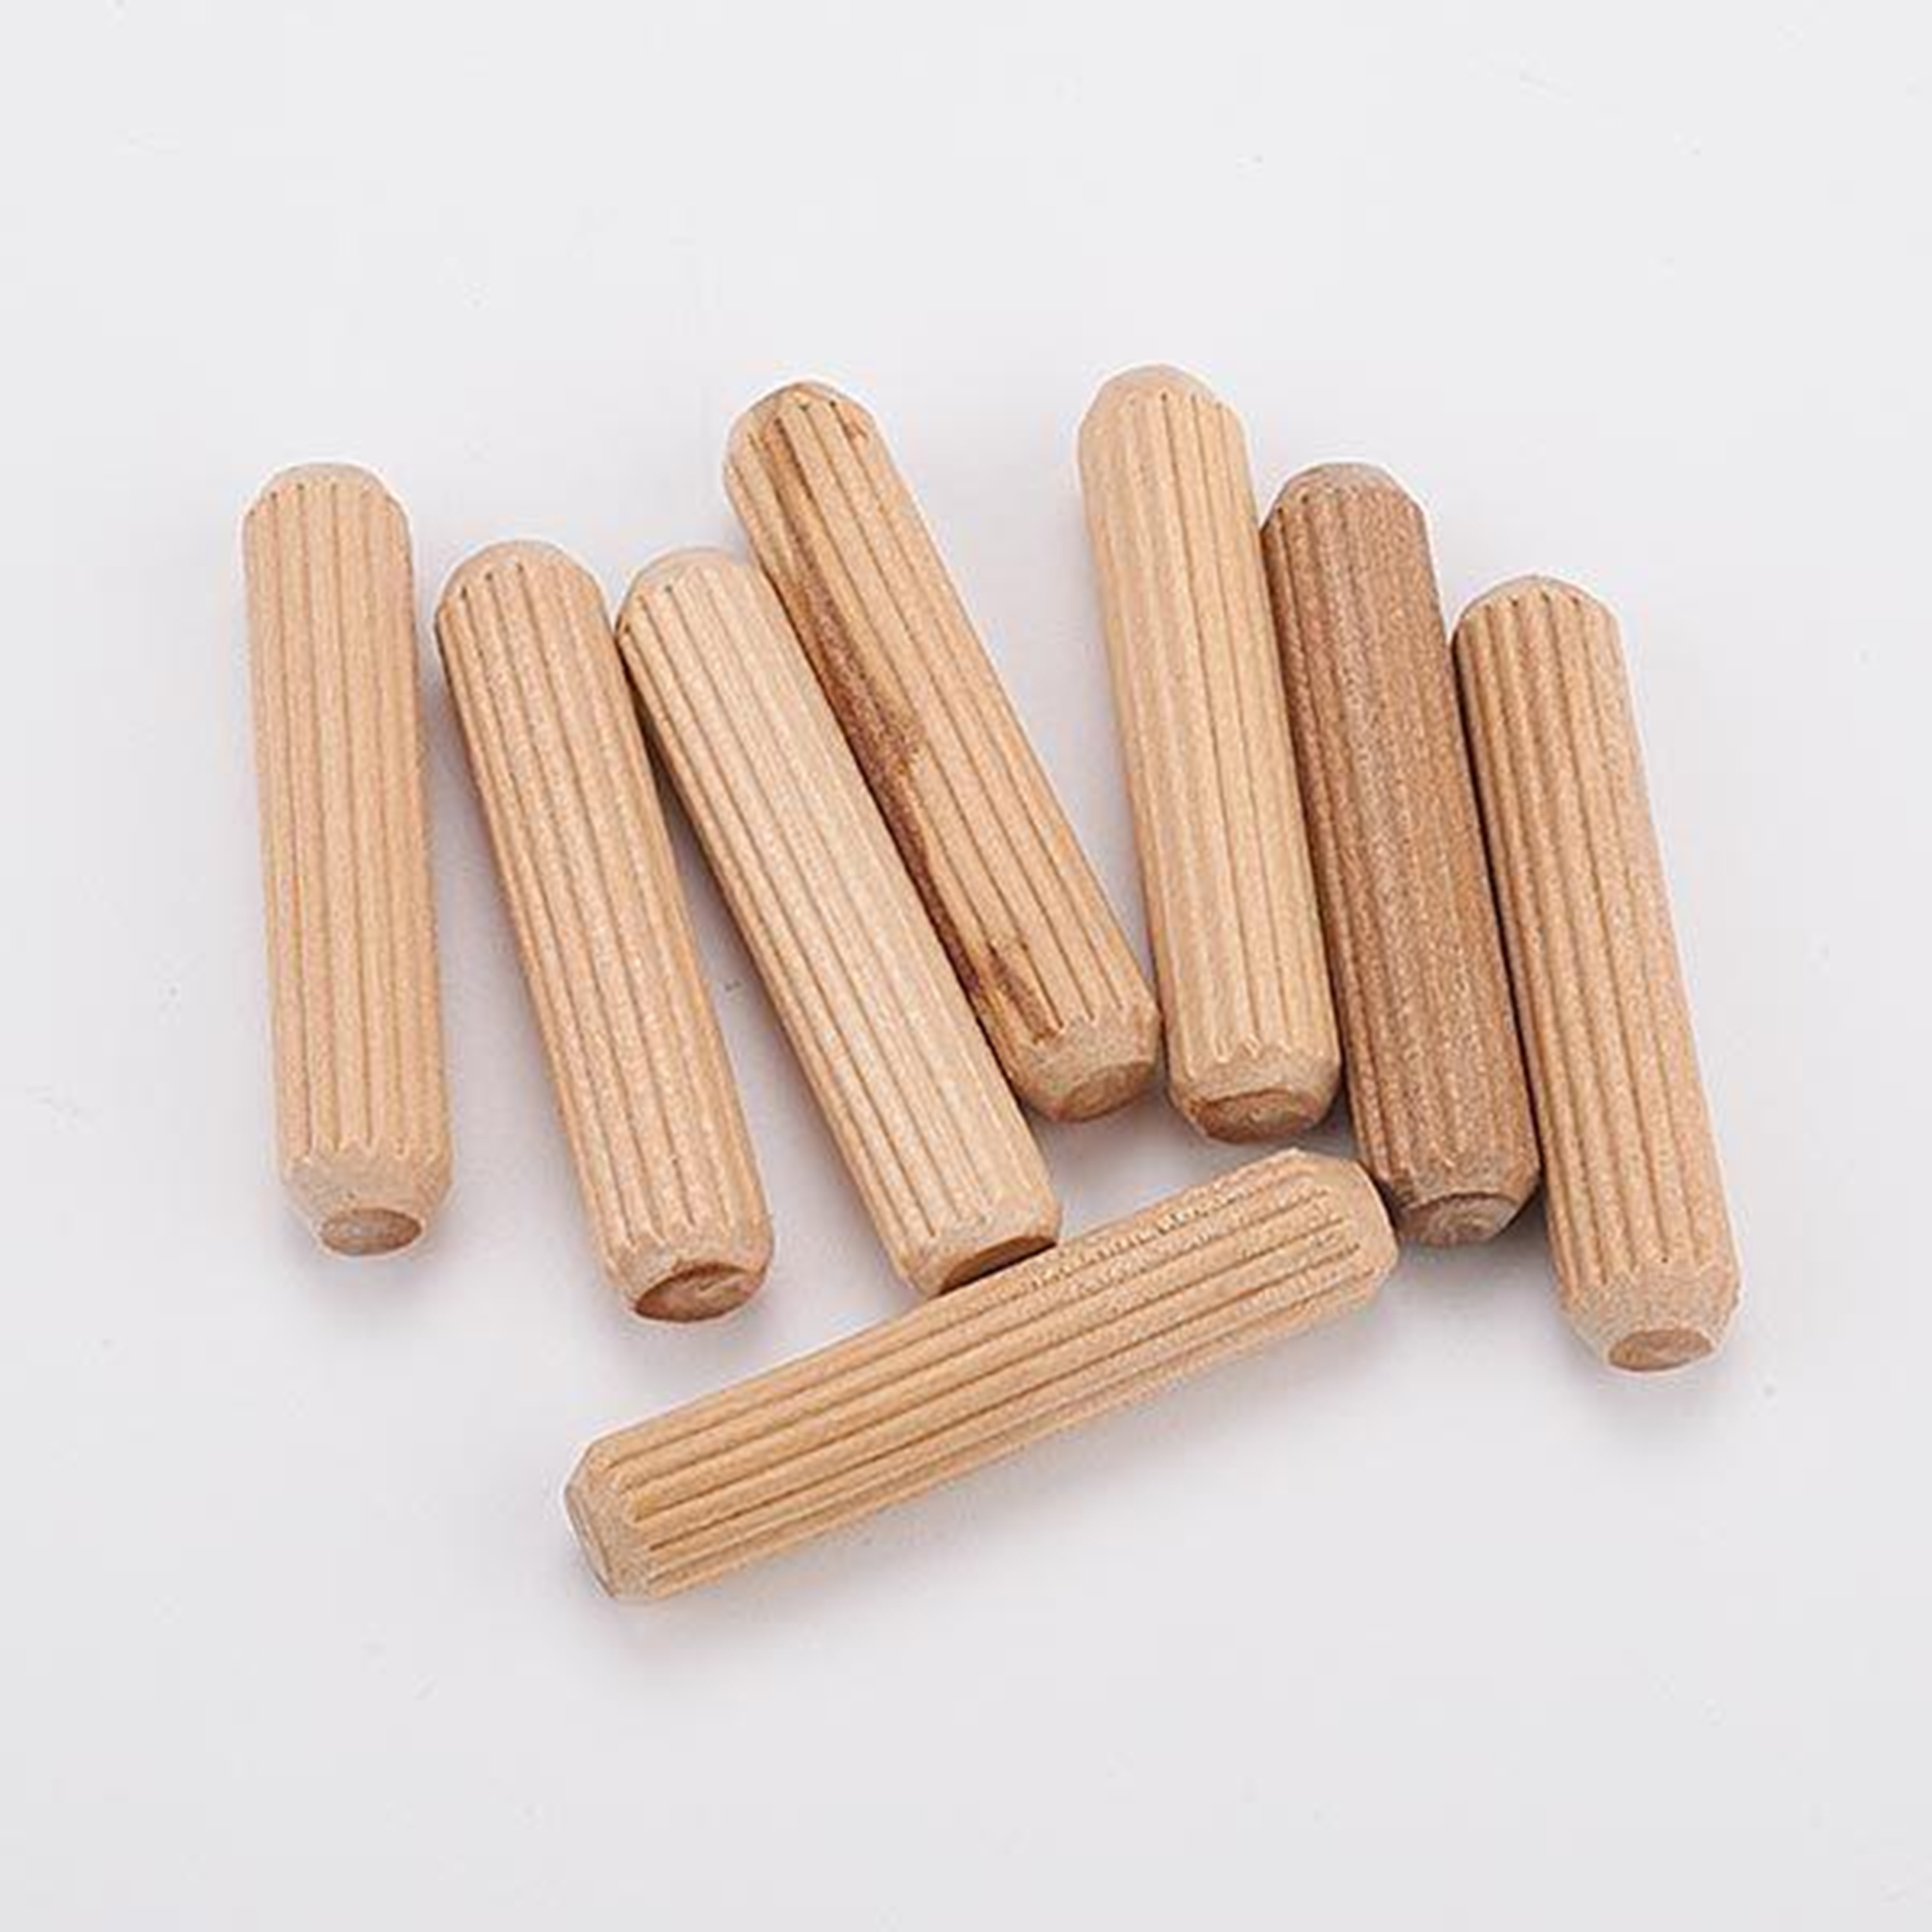 45-count 5/16-inch Fluted Dowel Pins